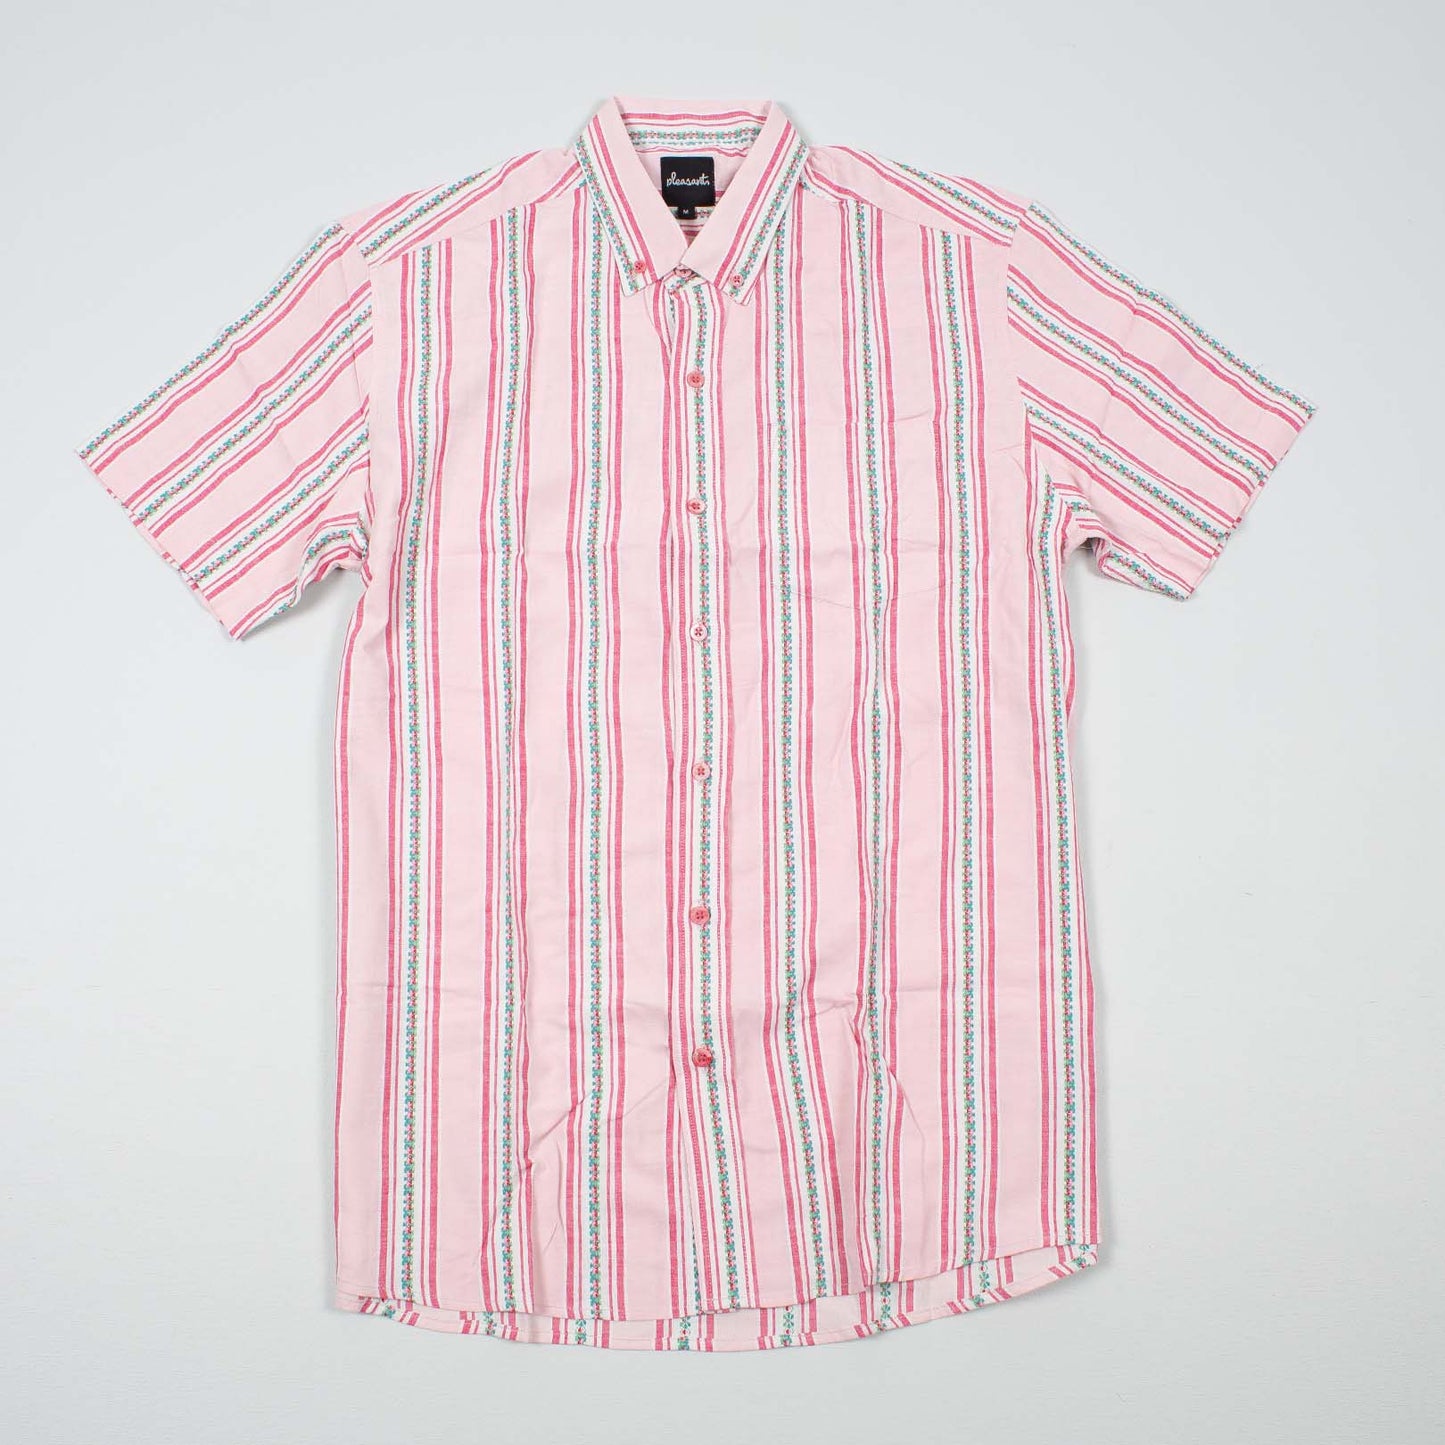 Striped pink upcycled shirt